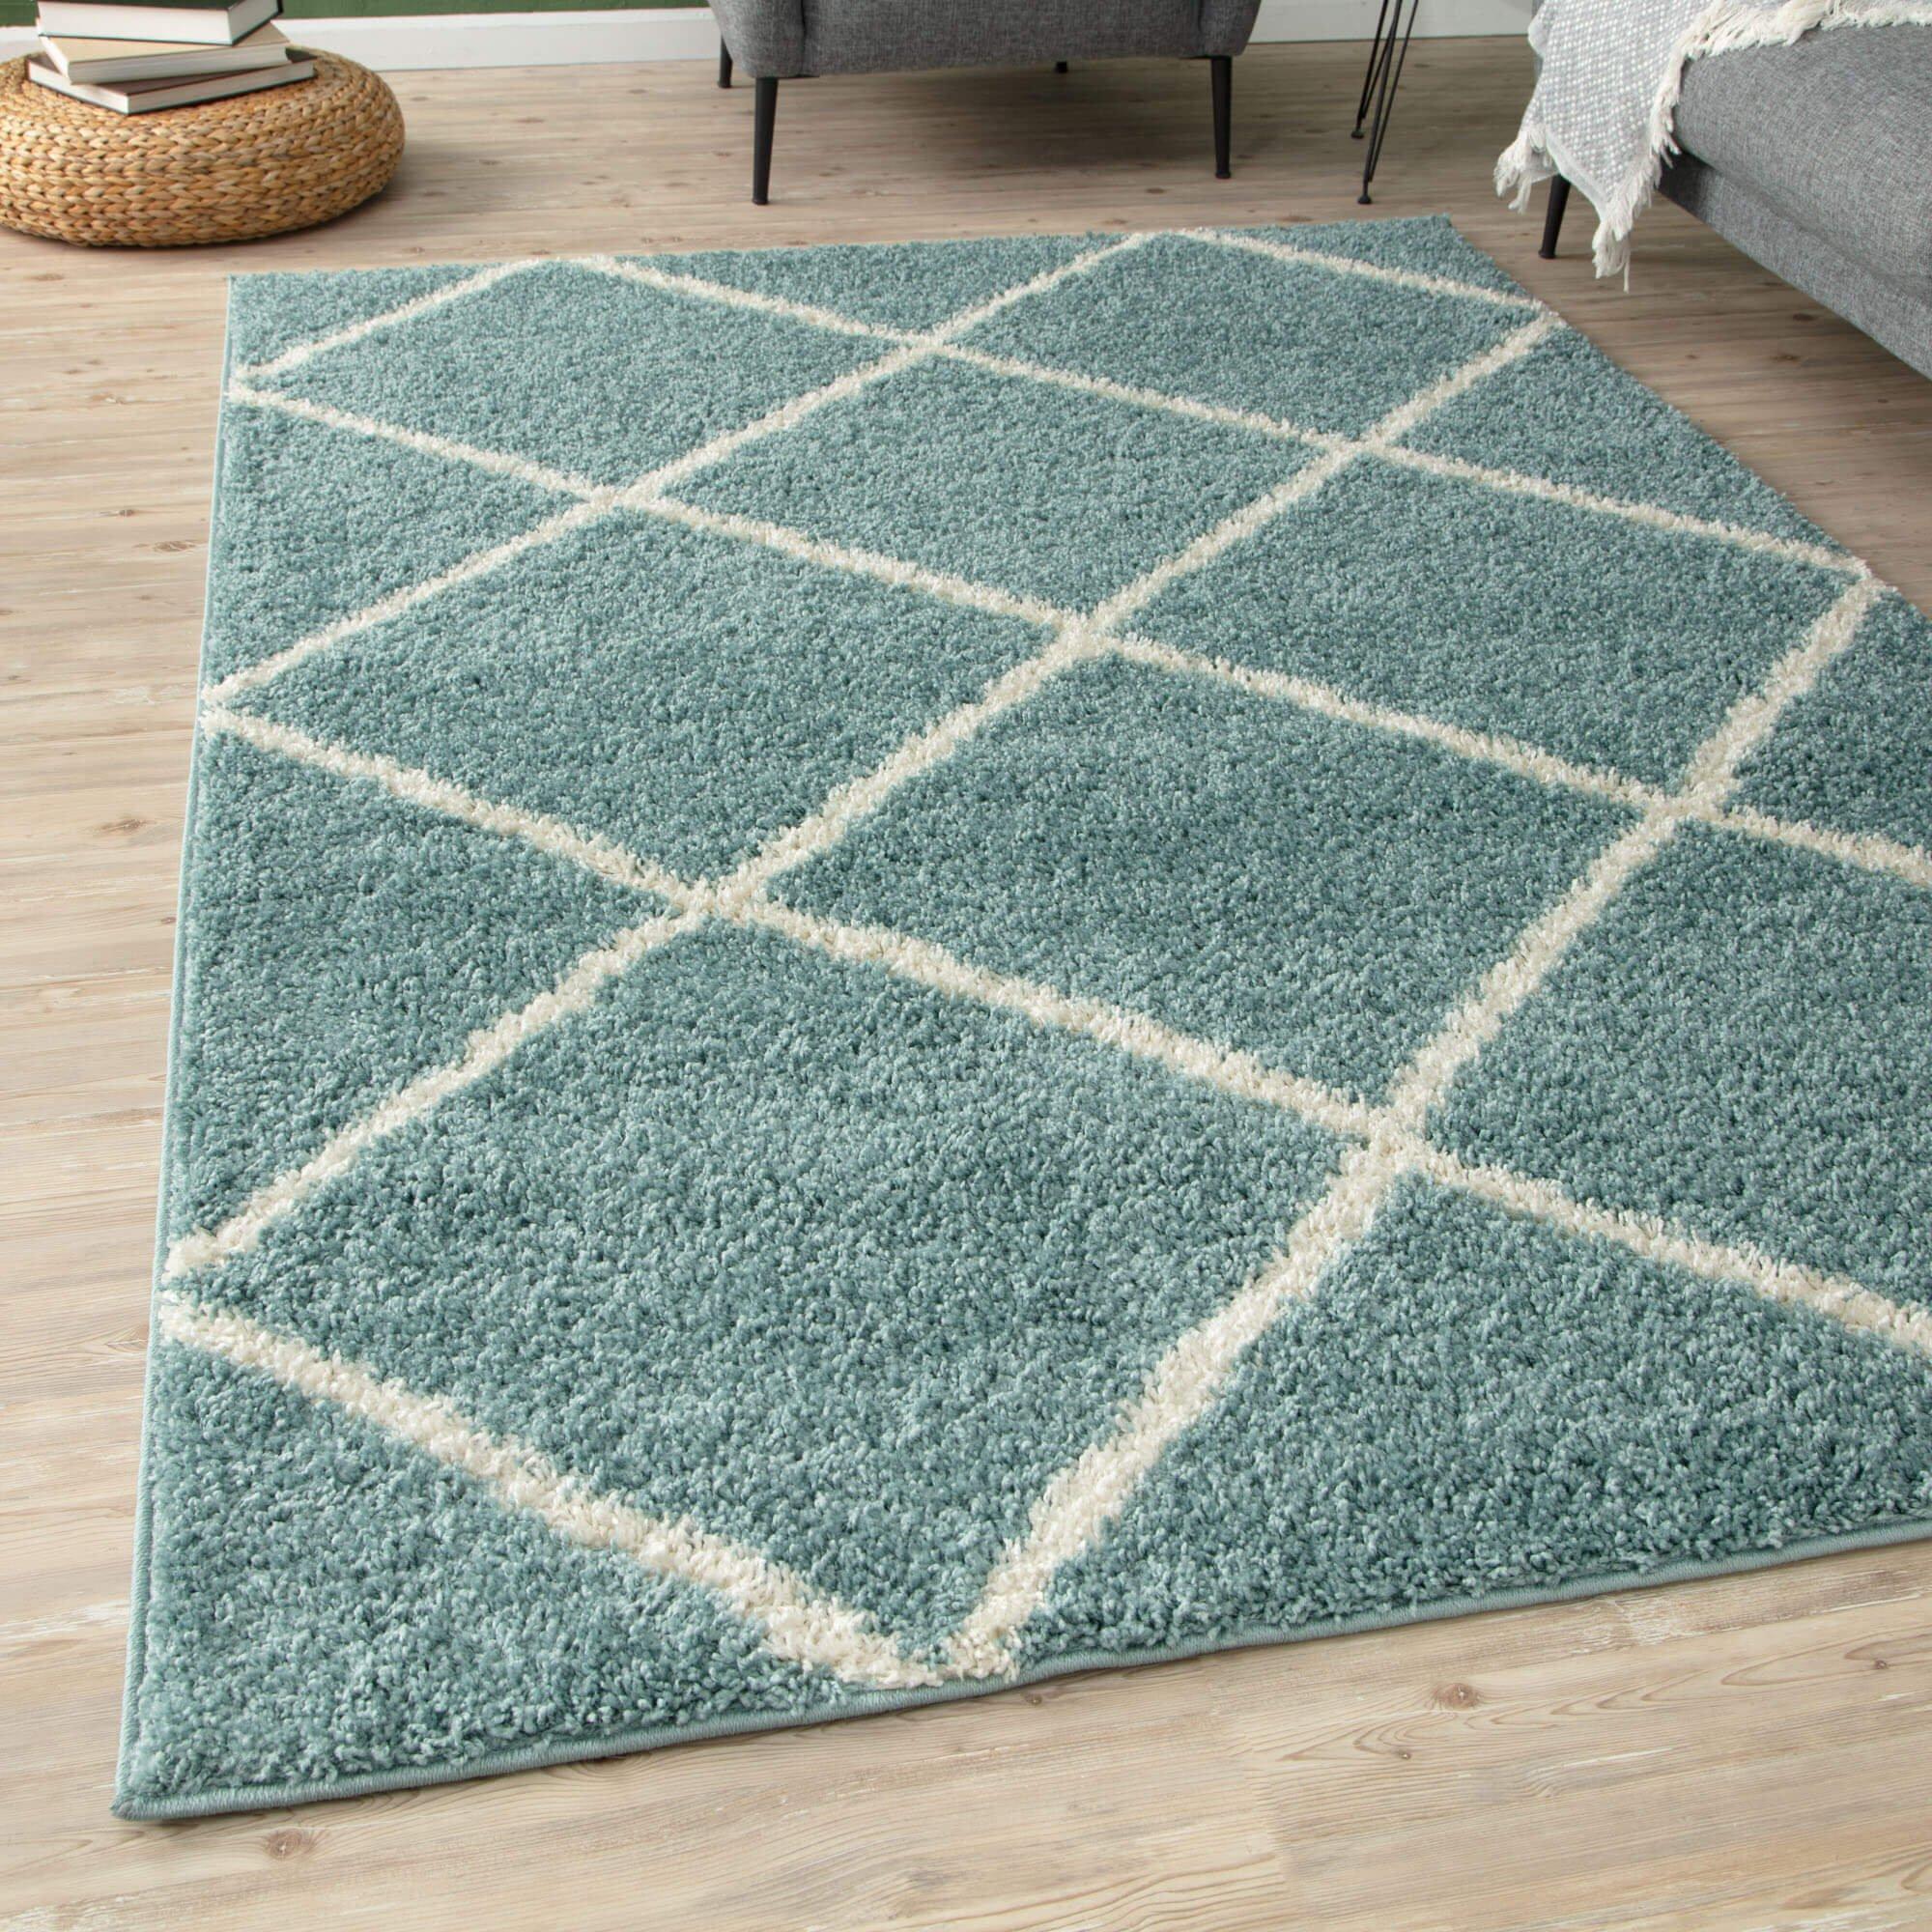 Myshaggy Collection Rugs Diamond Design in Duck Egg Blue - 383DB